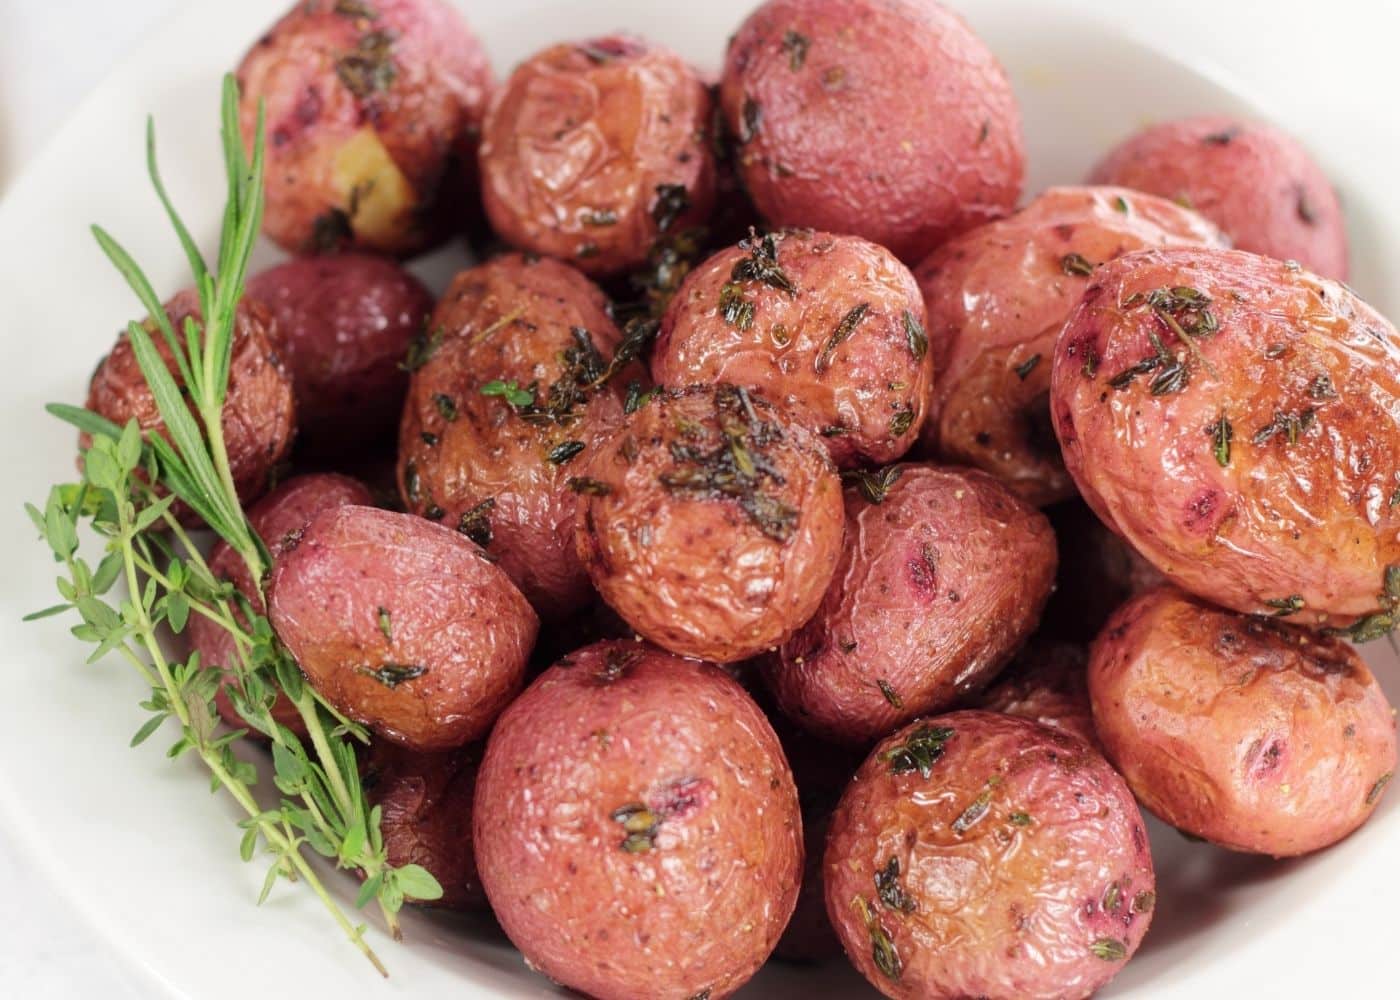 https://www.cleaneatingkitchen.com/wp-content/uploads/2021/11/air-fryer-baby-potatoes-in-bowl-2.jpg